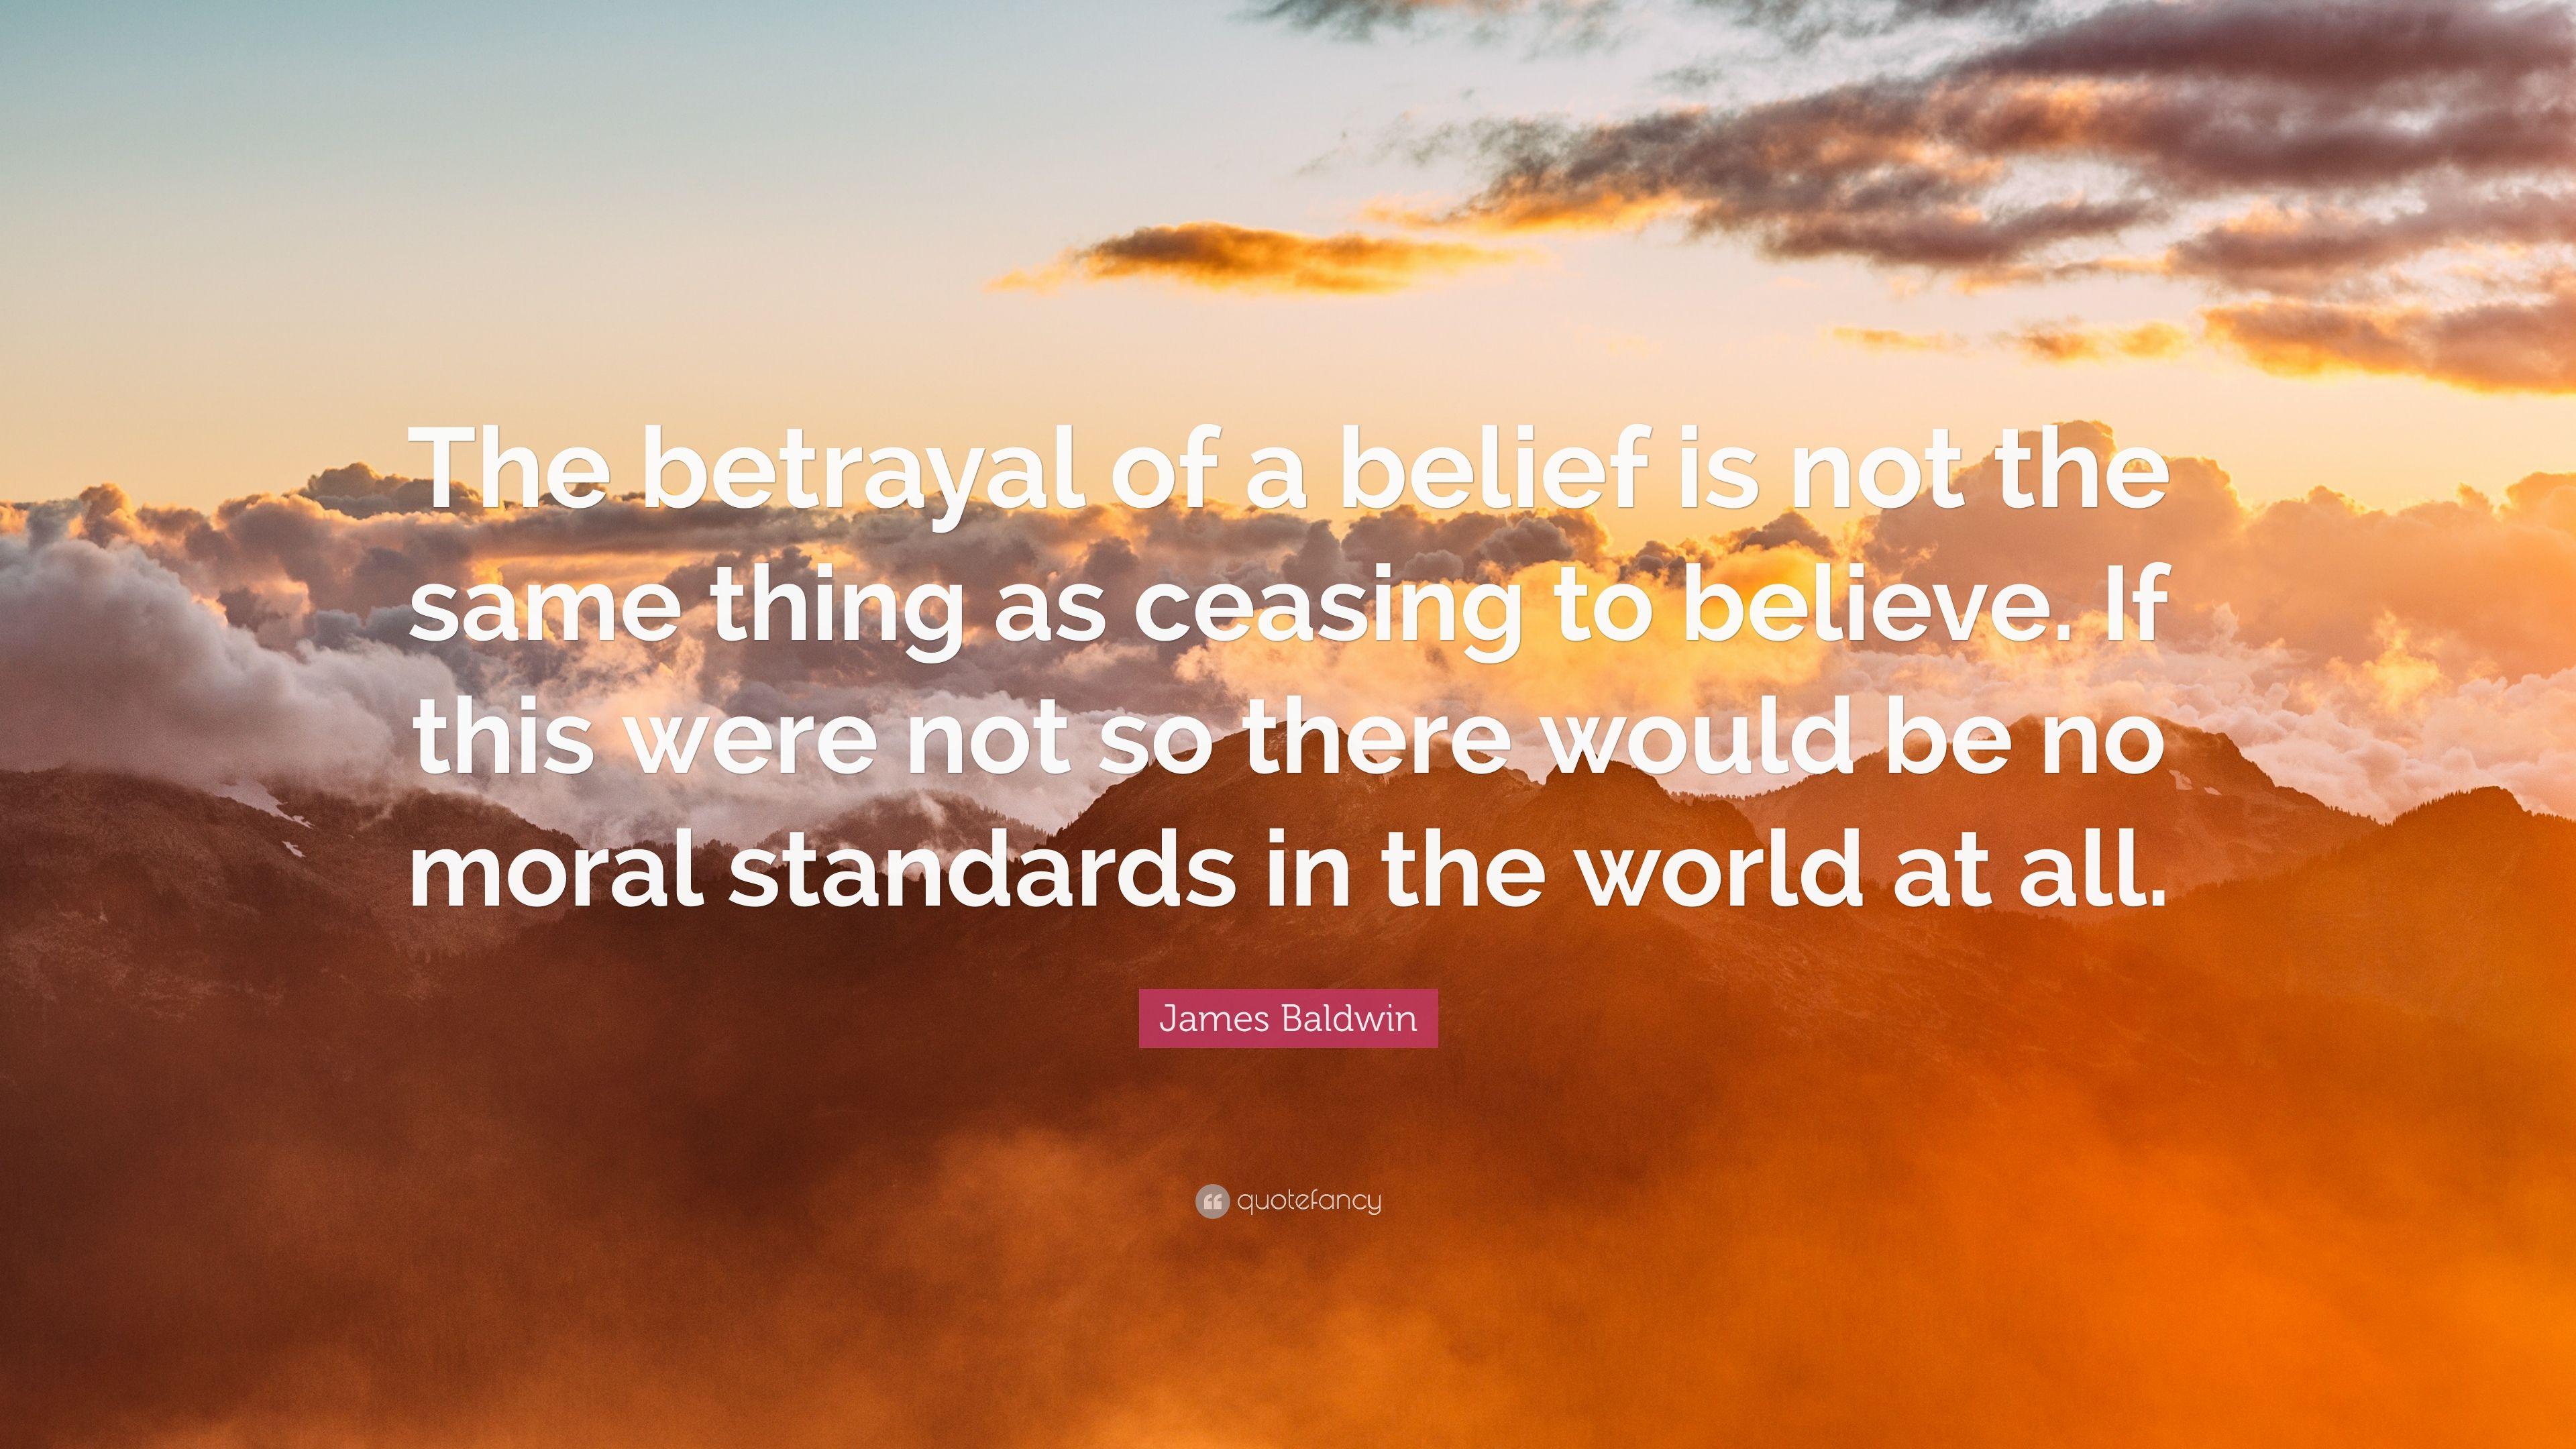 James Baldwin Quote: “The betrayal of a belief is not the same